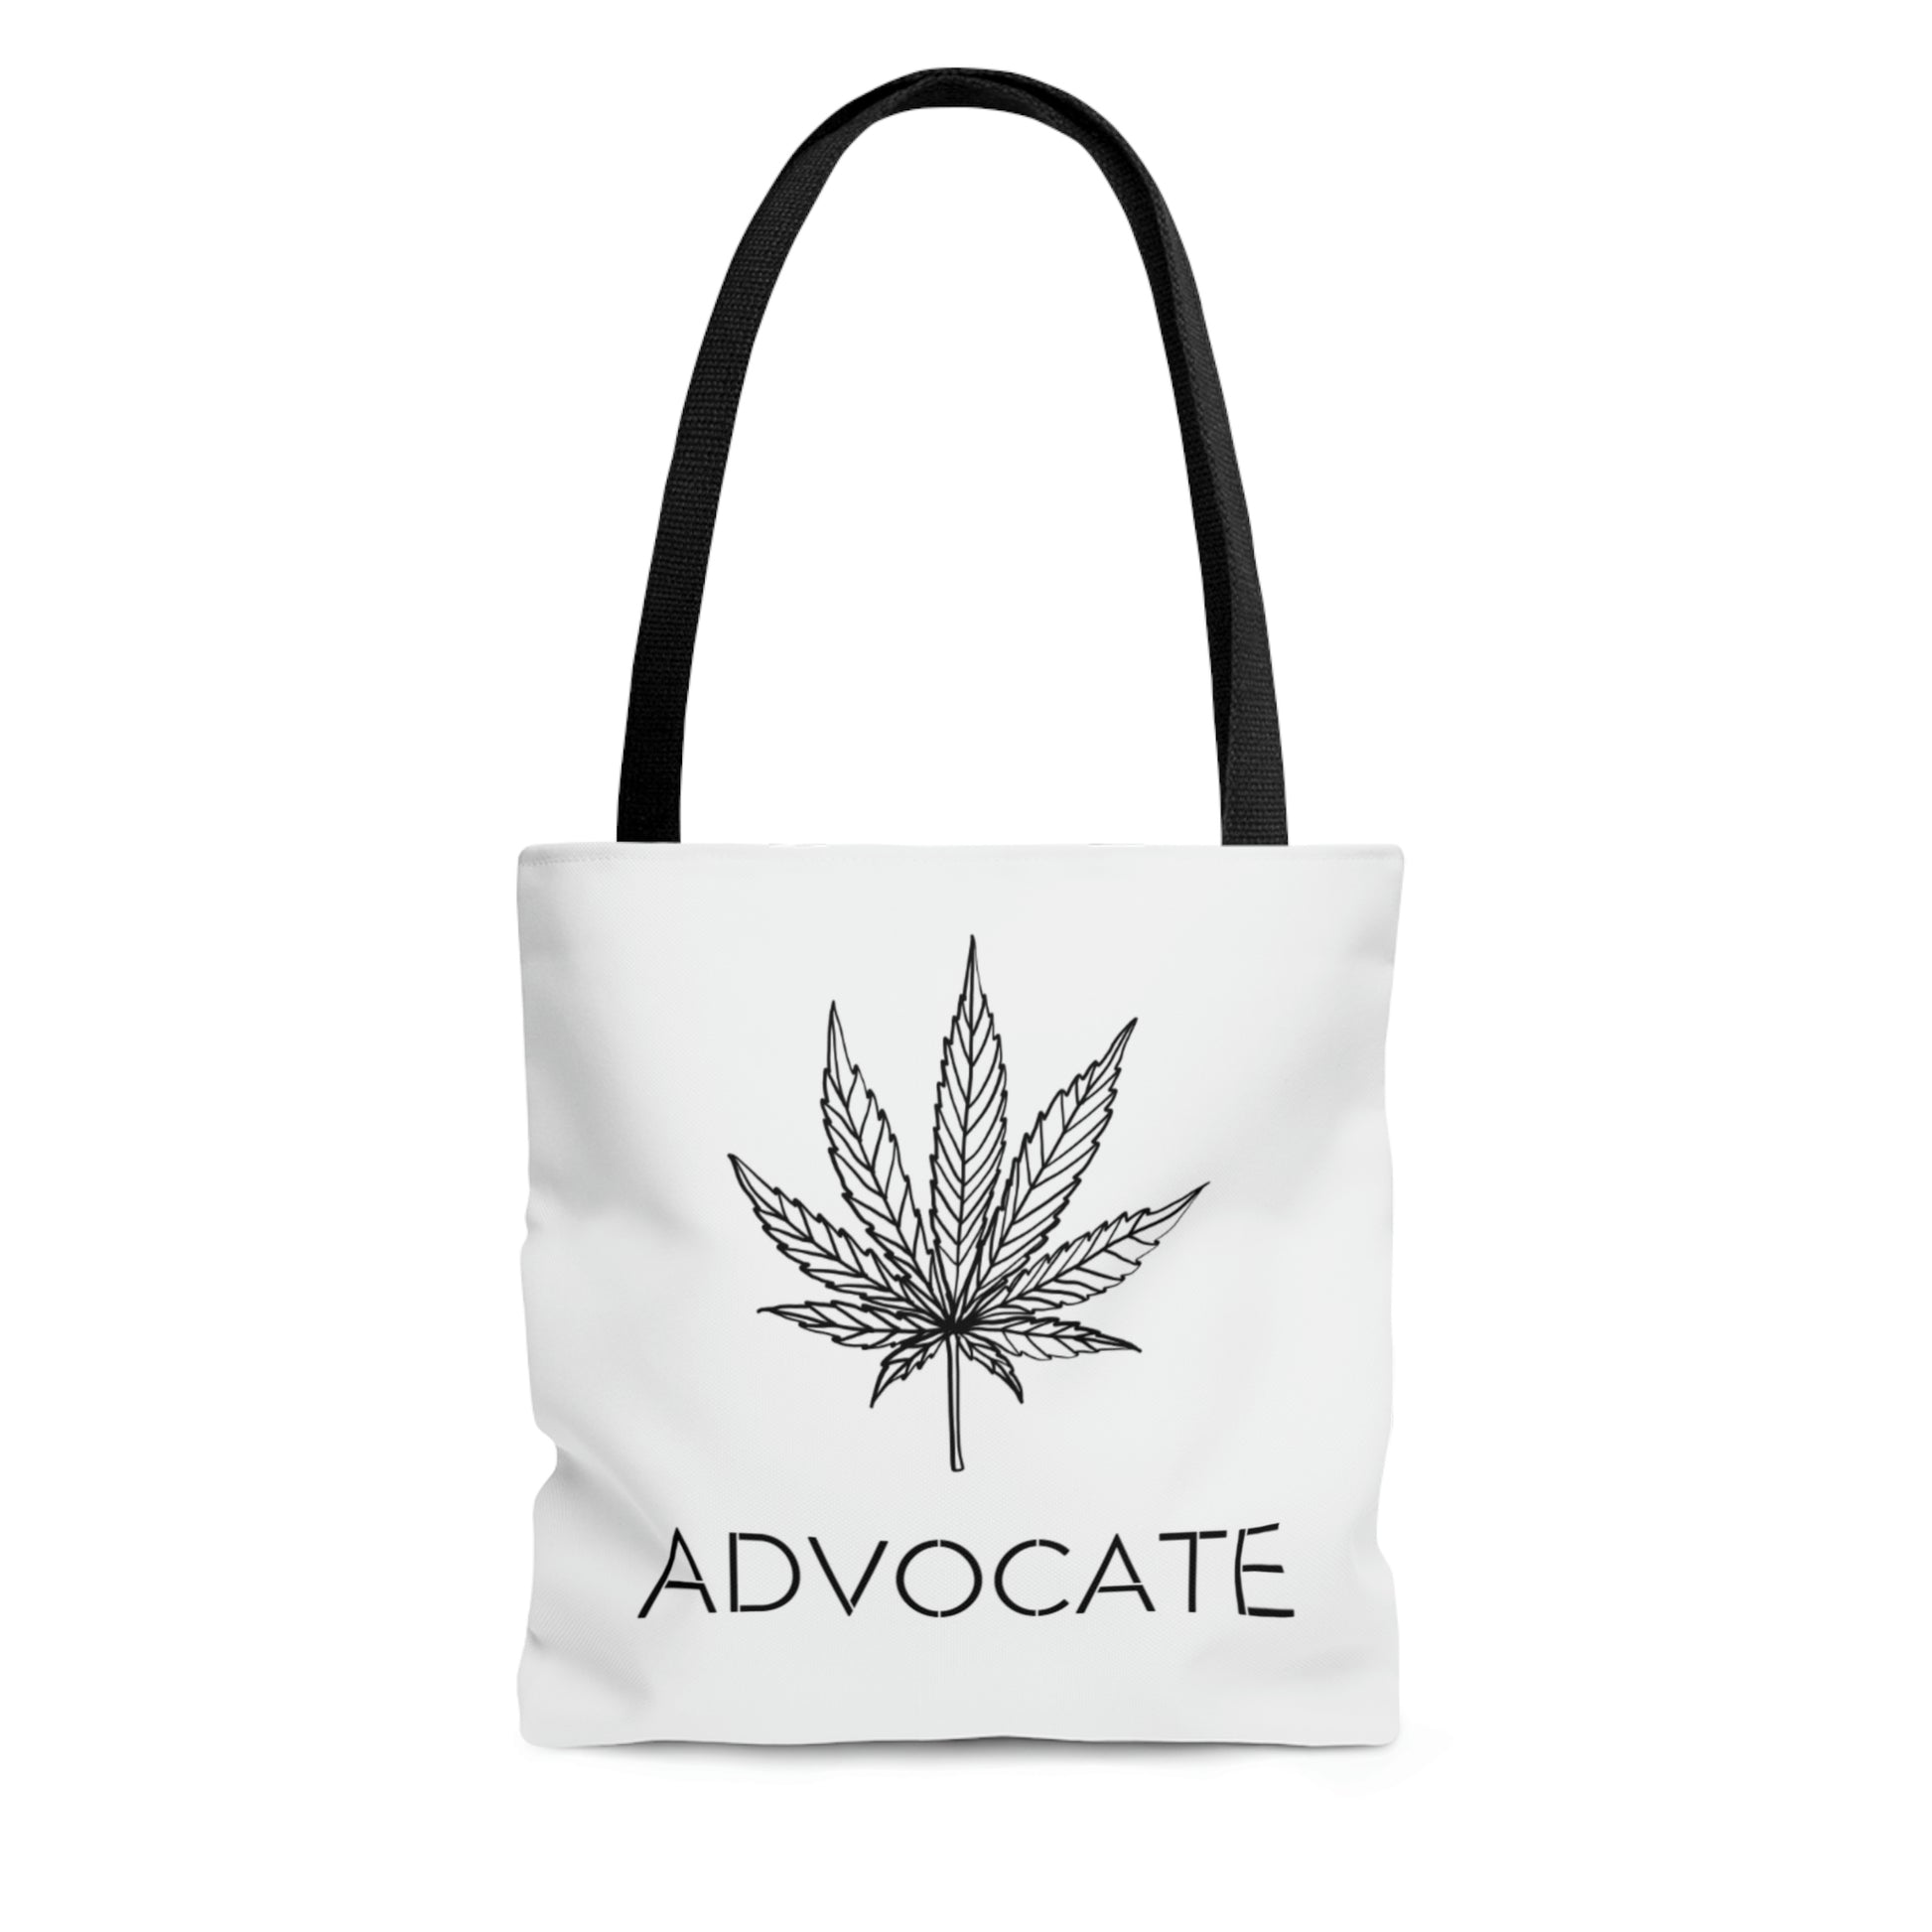 A white Marijuana Advocate squared tote bag designed for the cannabis advocate in your life